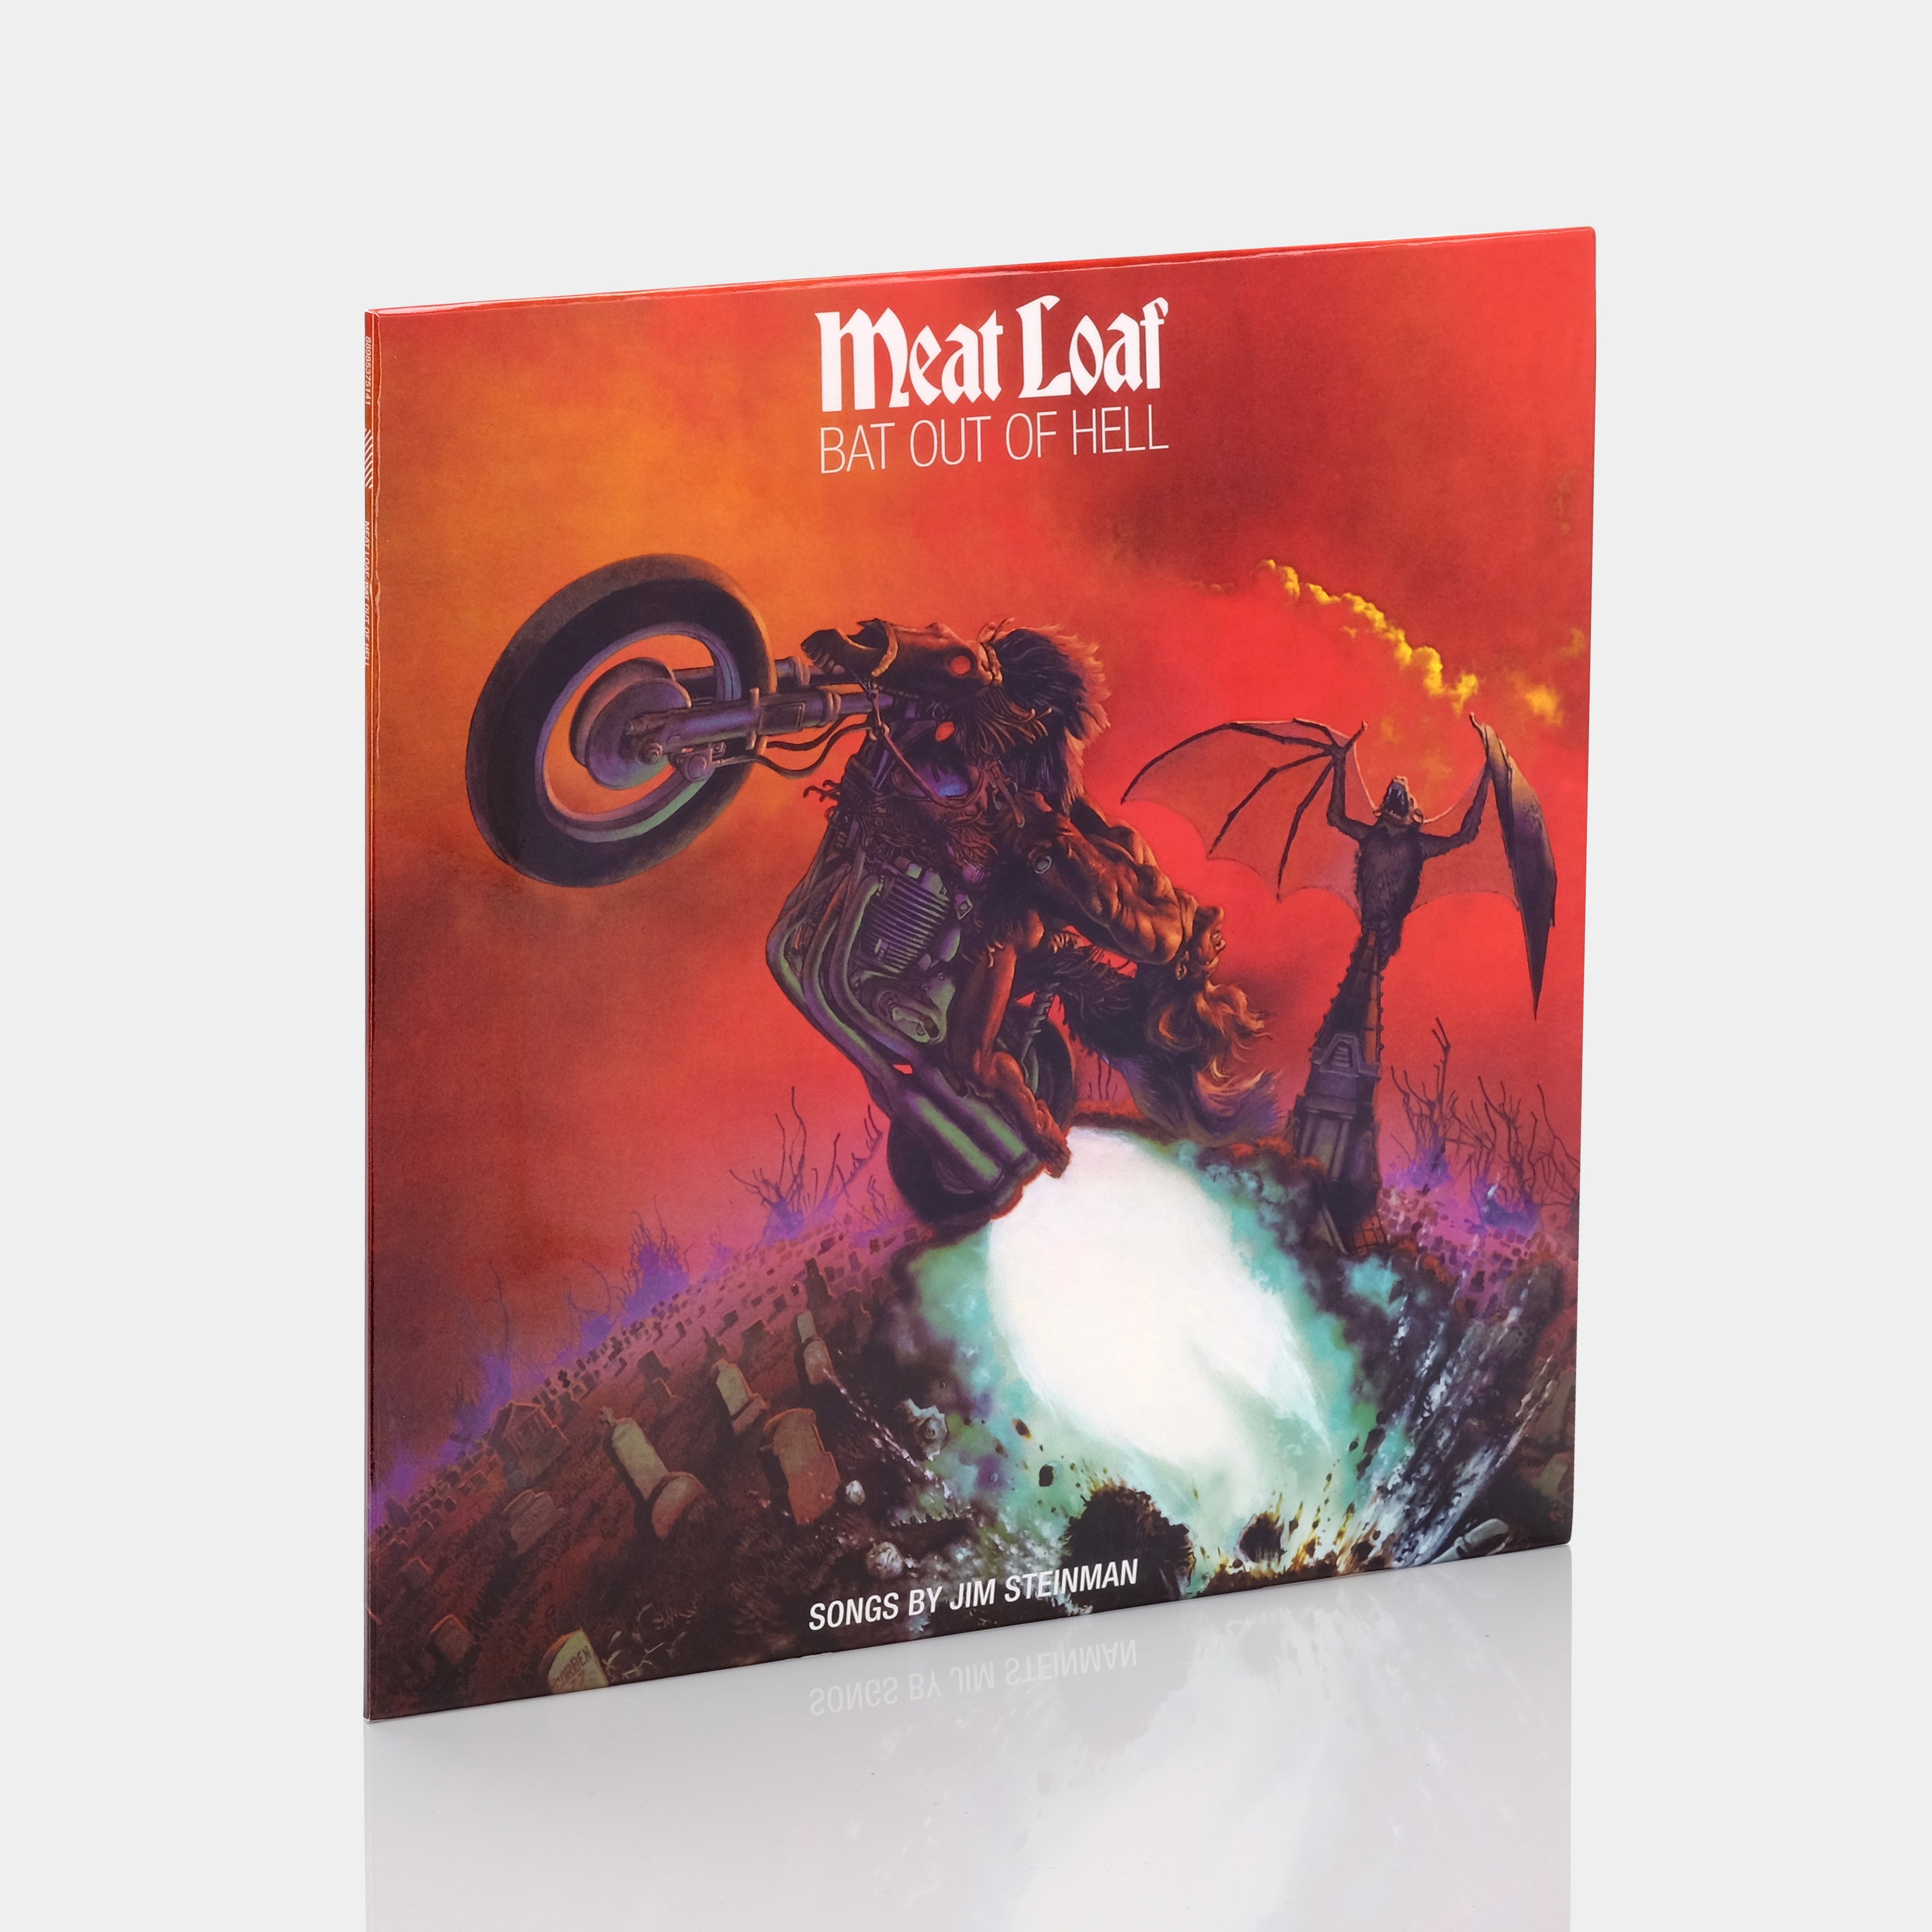 Meat Loaf - Bat Out Of Hell LP Vinyl Record